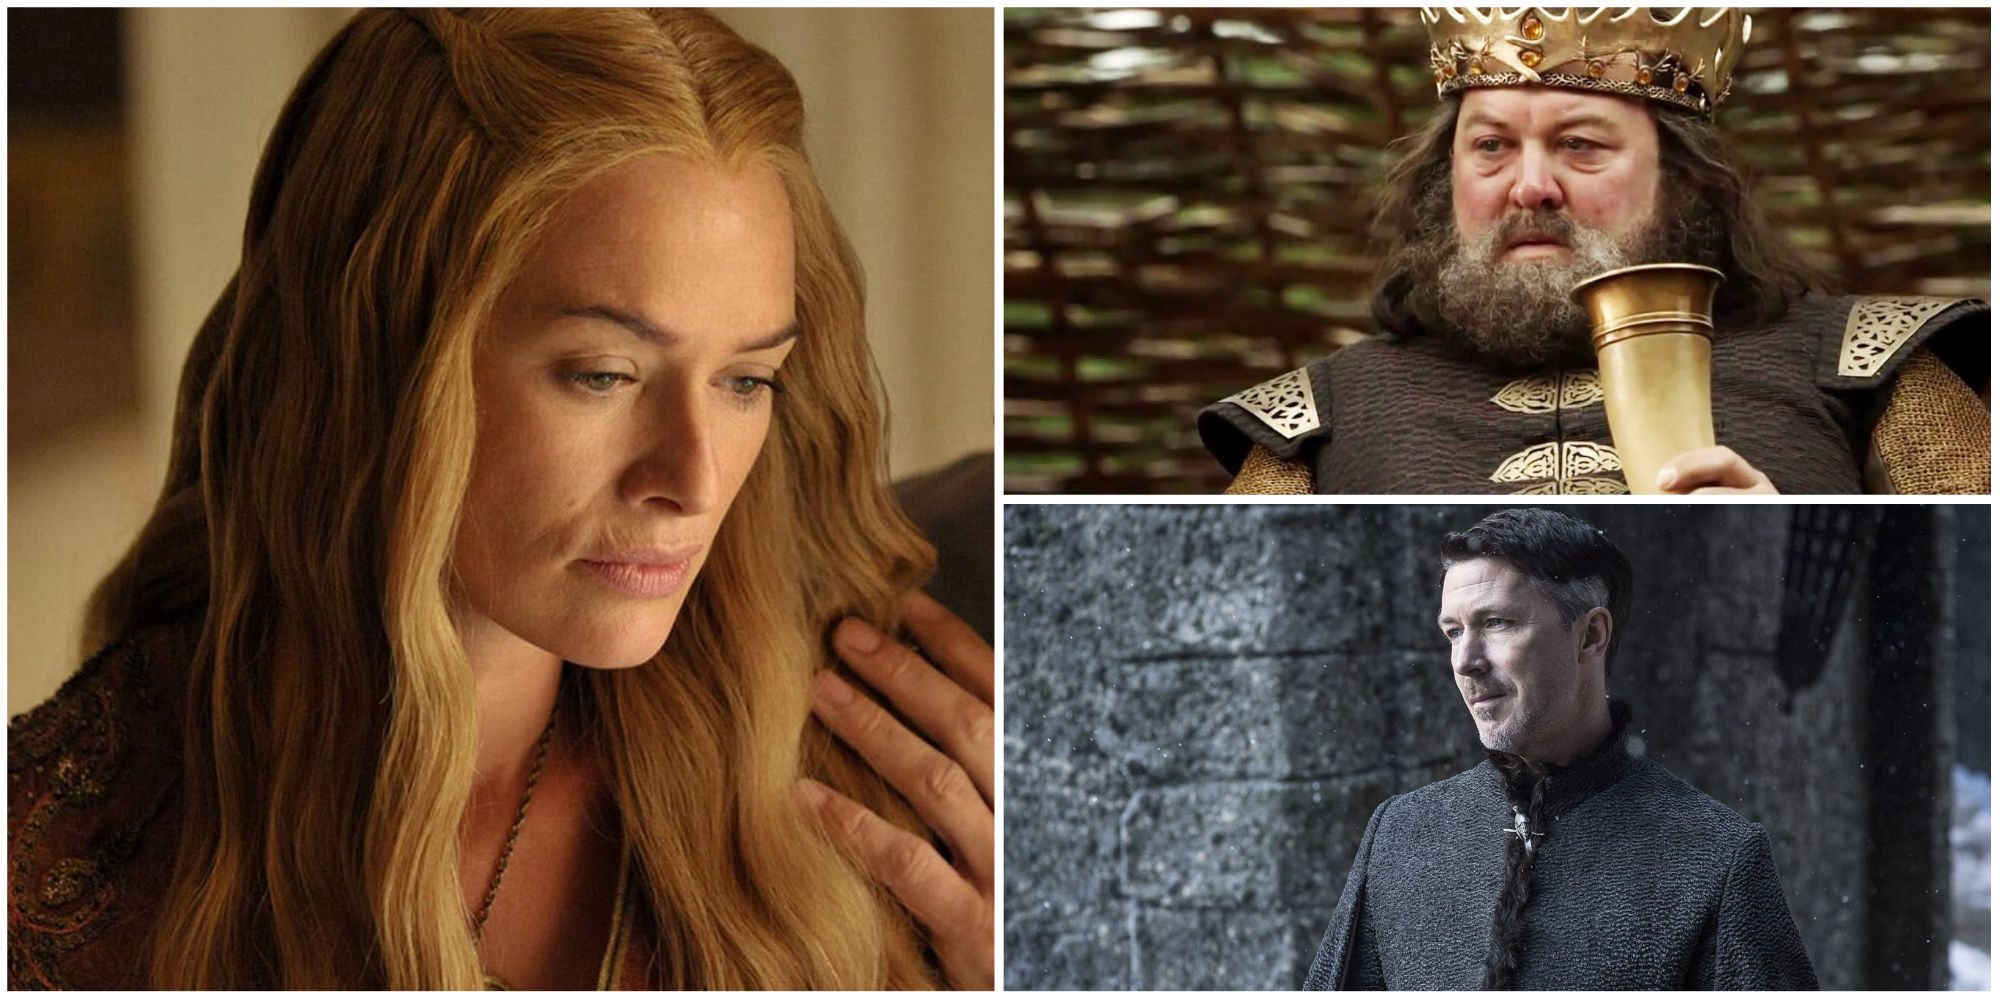 The 7 Deadly Sins Of Game Of Thrones Characters Cersei Robert and Littlefinger